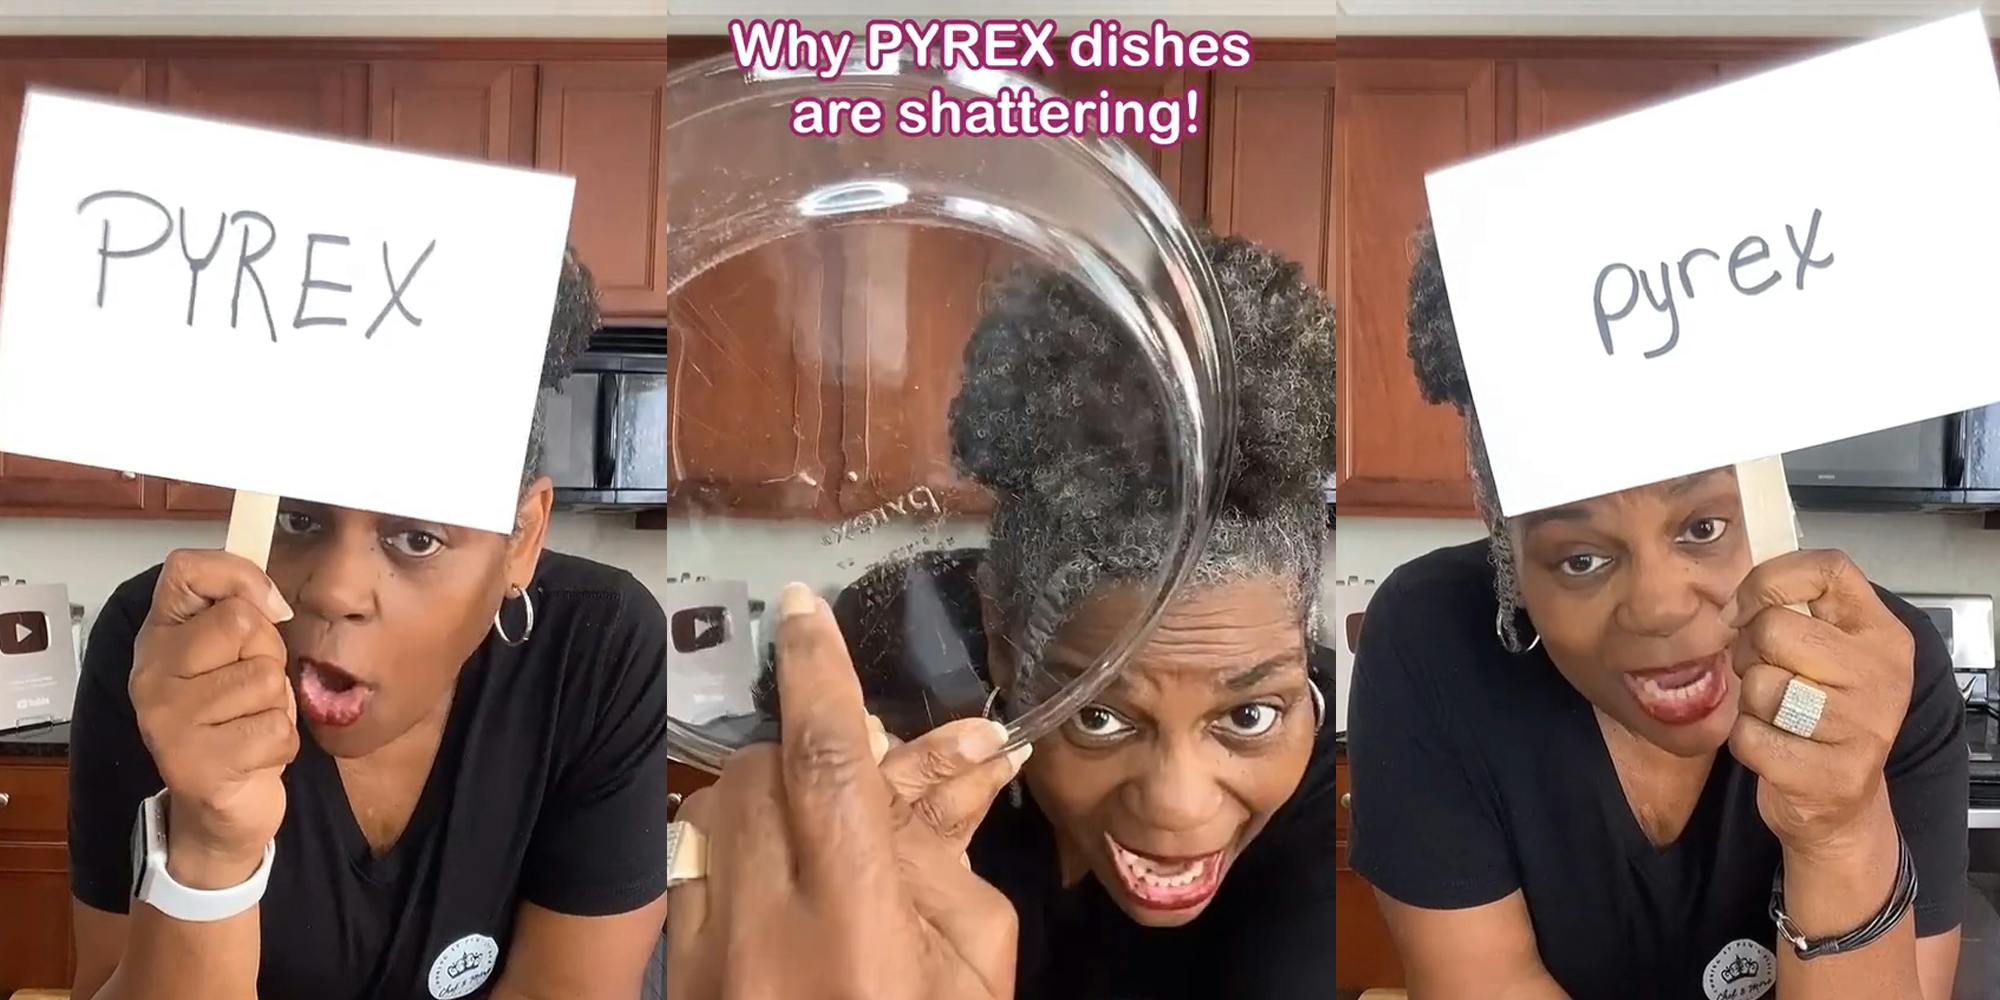 woman speaking in kitchen holing "PYREX" sign (l) woman speaking in kitchen holding pyrex dish with caption "Why PYREX dishes are shattering" (c) woman speaking in kitchen holing "pyrex" sign (r)